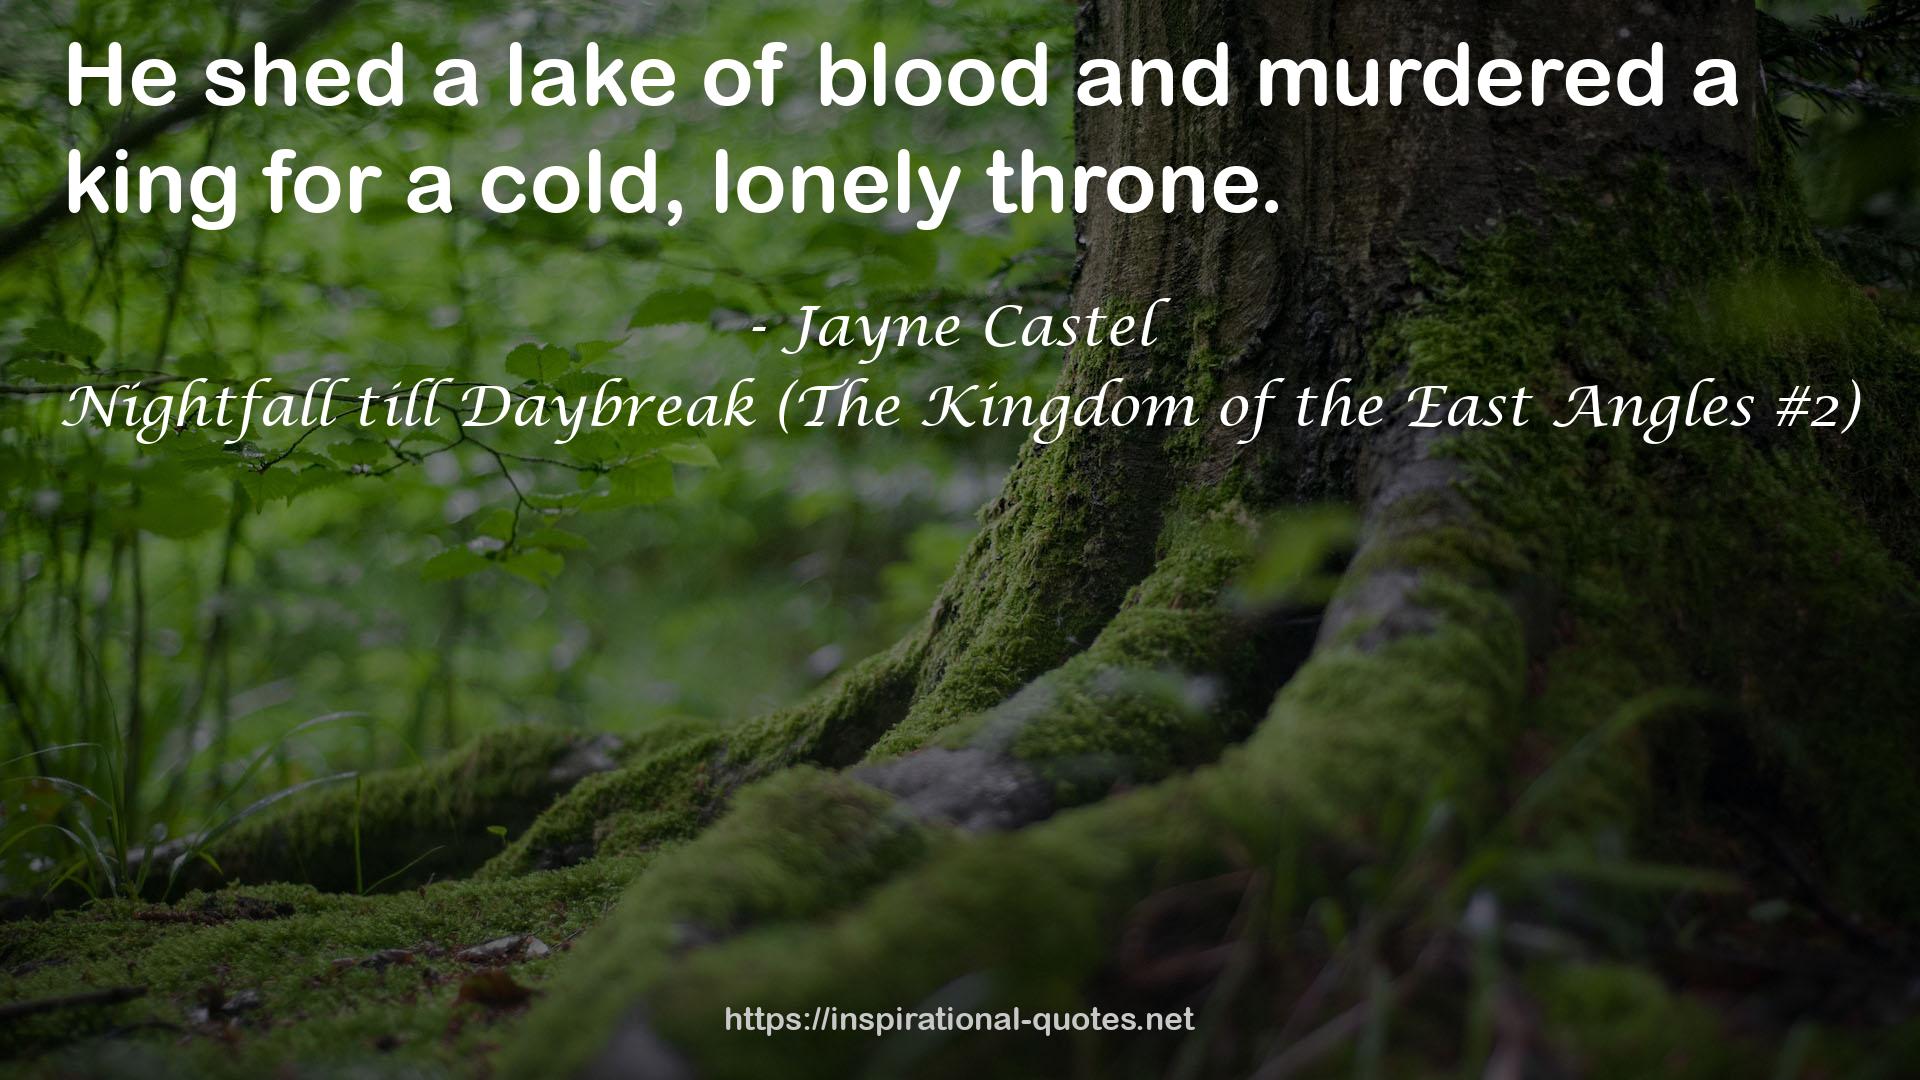 Nightfall till Daybreak (The Kingdom of the East Angles #2) QUOTES